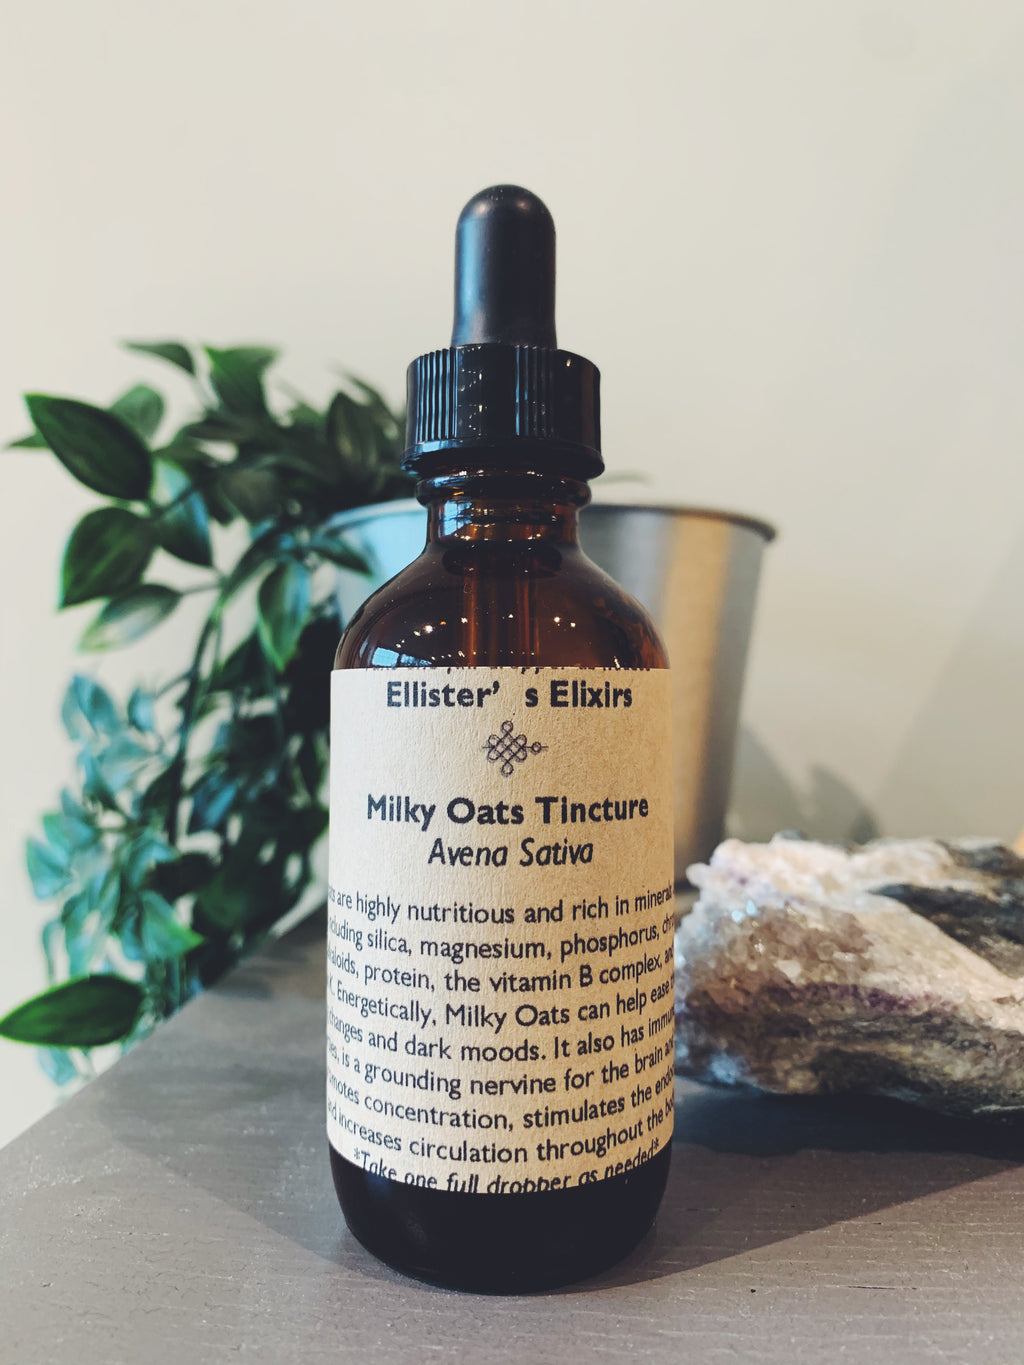 Milky Oats Tincture